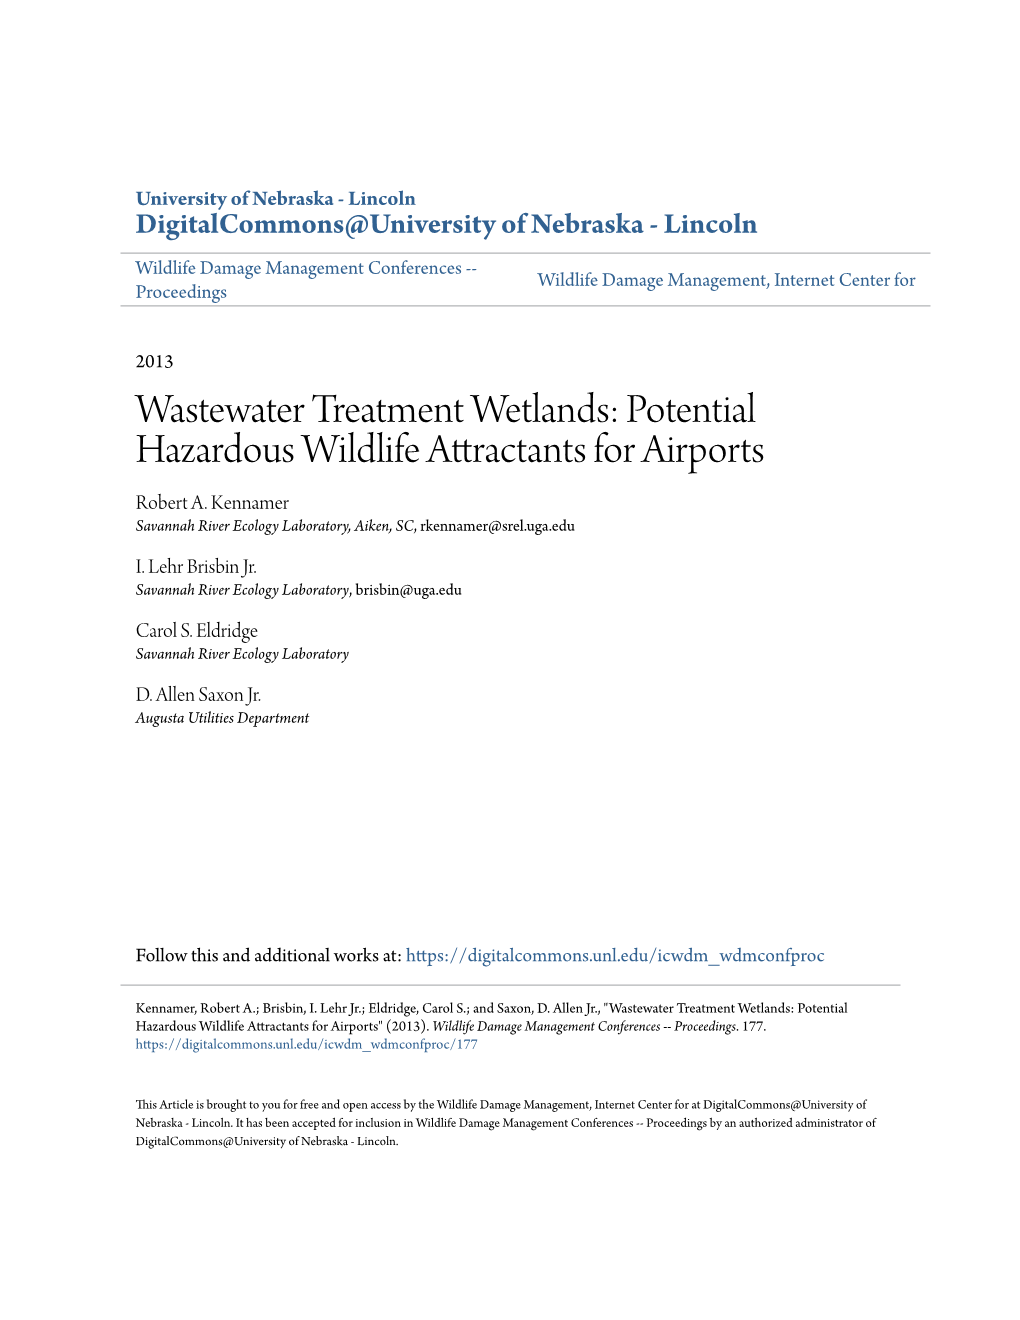 Wastewater Treatment Wetlands: Potential Hazardous Wildlife Attractants for Airports Robert A